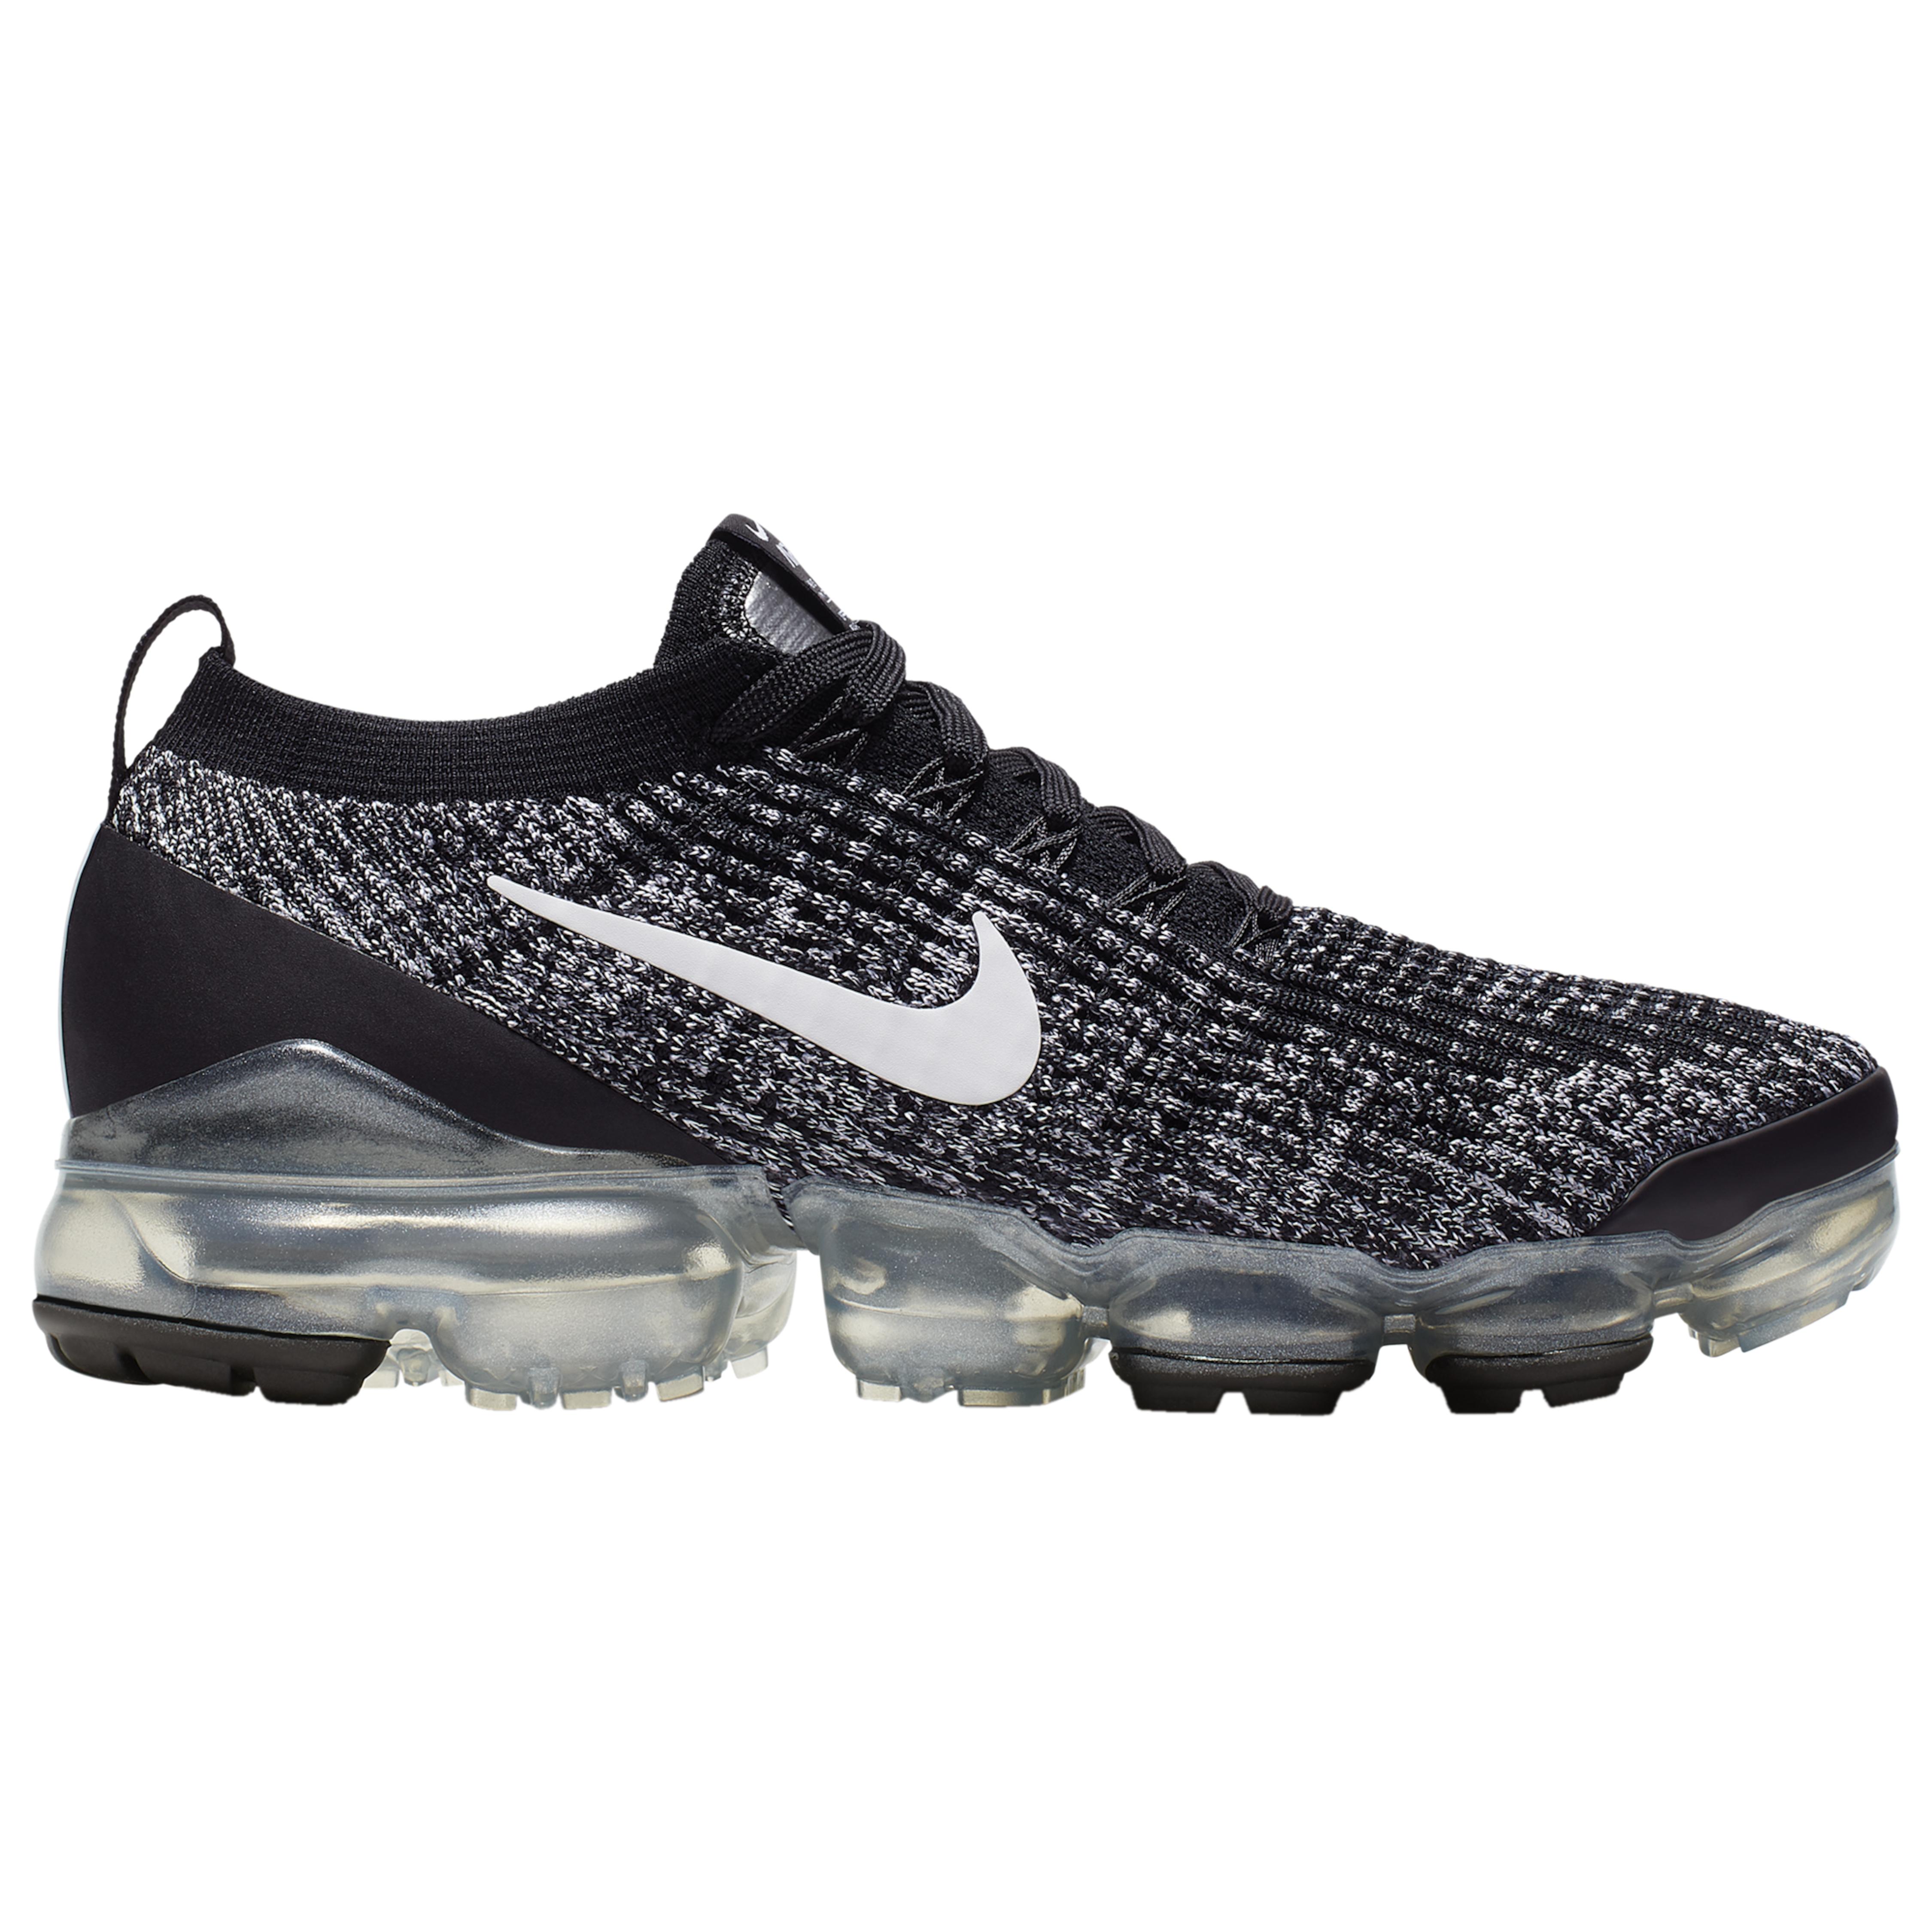 Nike Air Vapormax Flyknit 3 - Running Shoes in Black - Save 45 ...